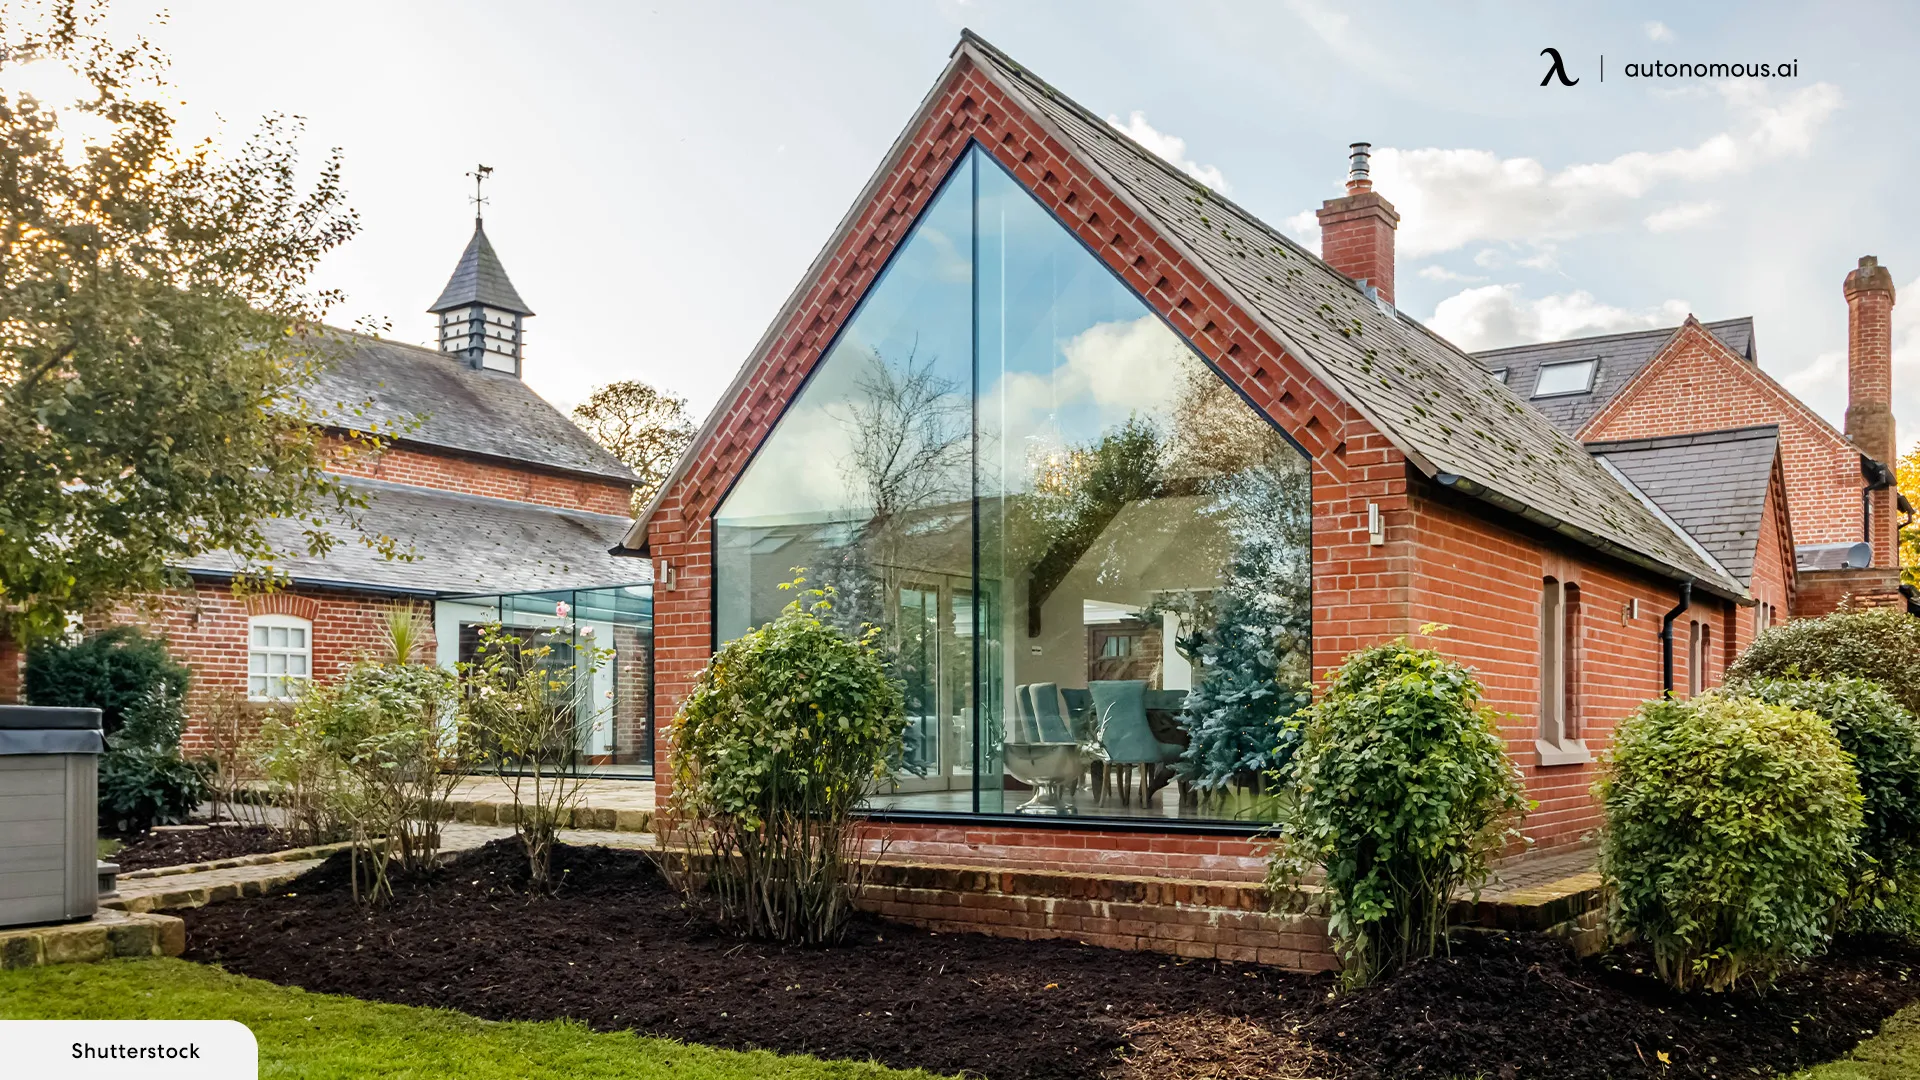 Contemporary Extensions - modern addition to traditional house